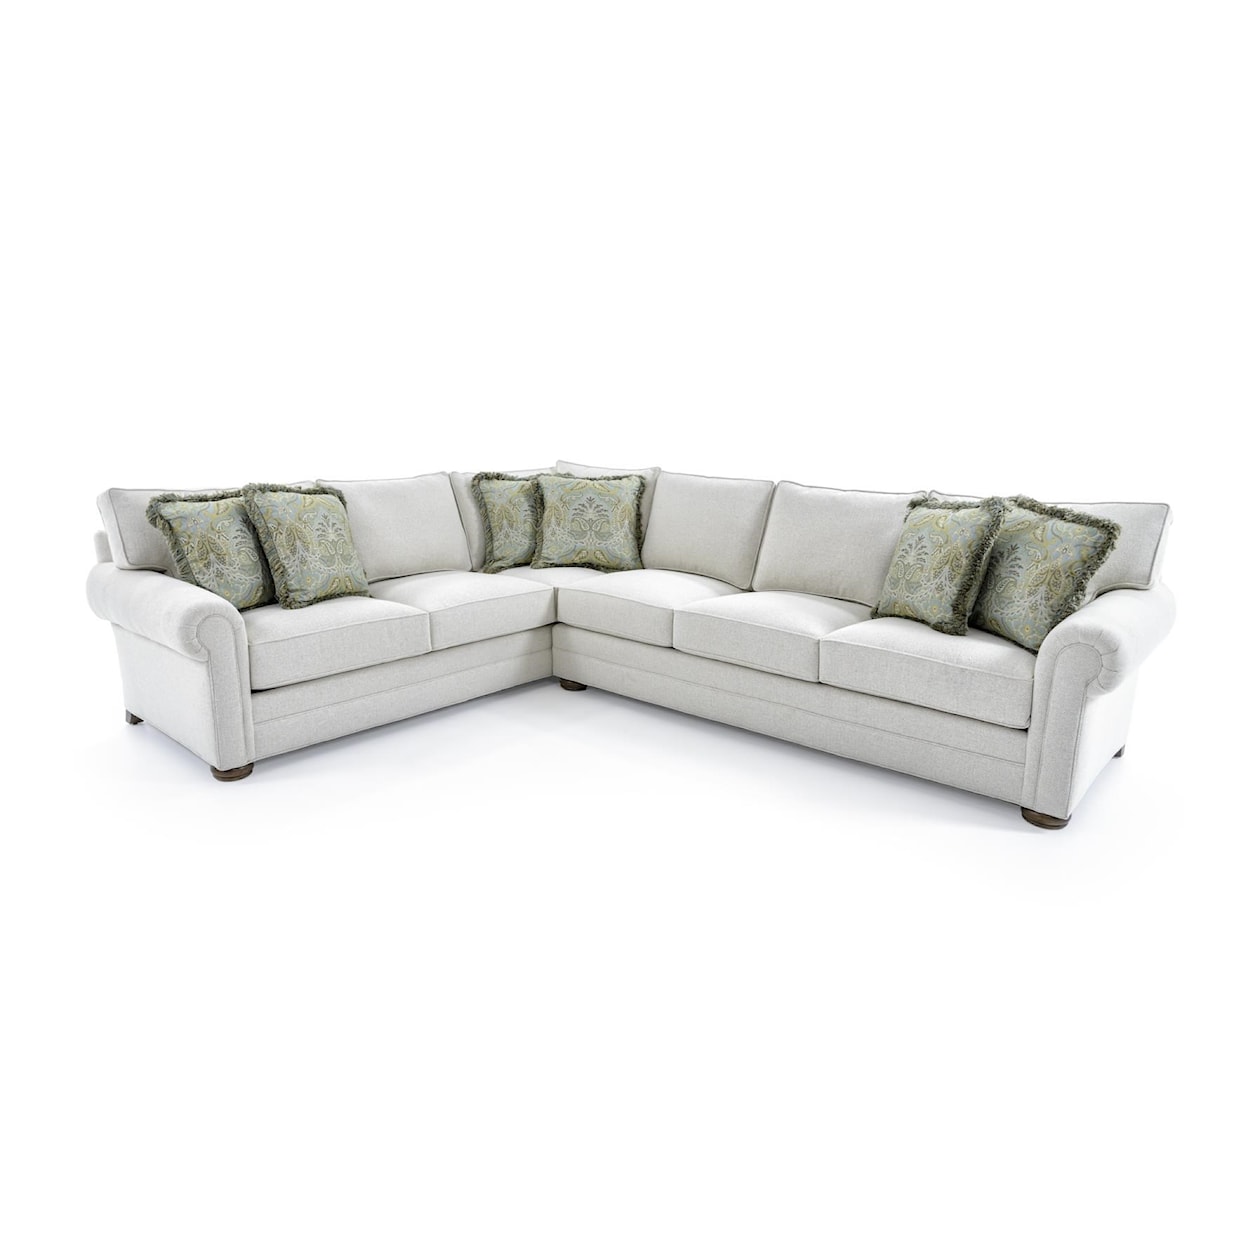 Century Cornerstone Customizable Sectional Sofa with Lawson Arms